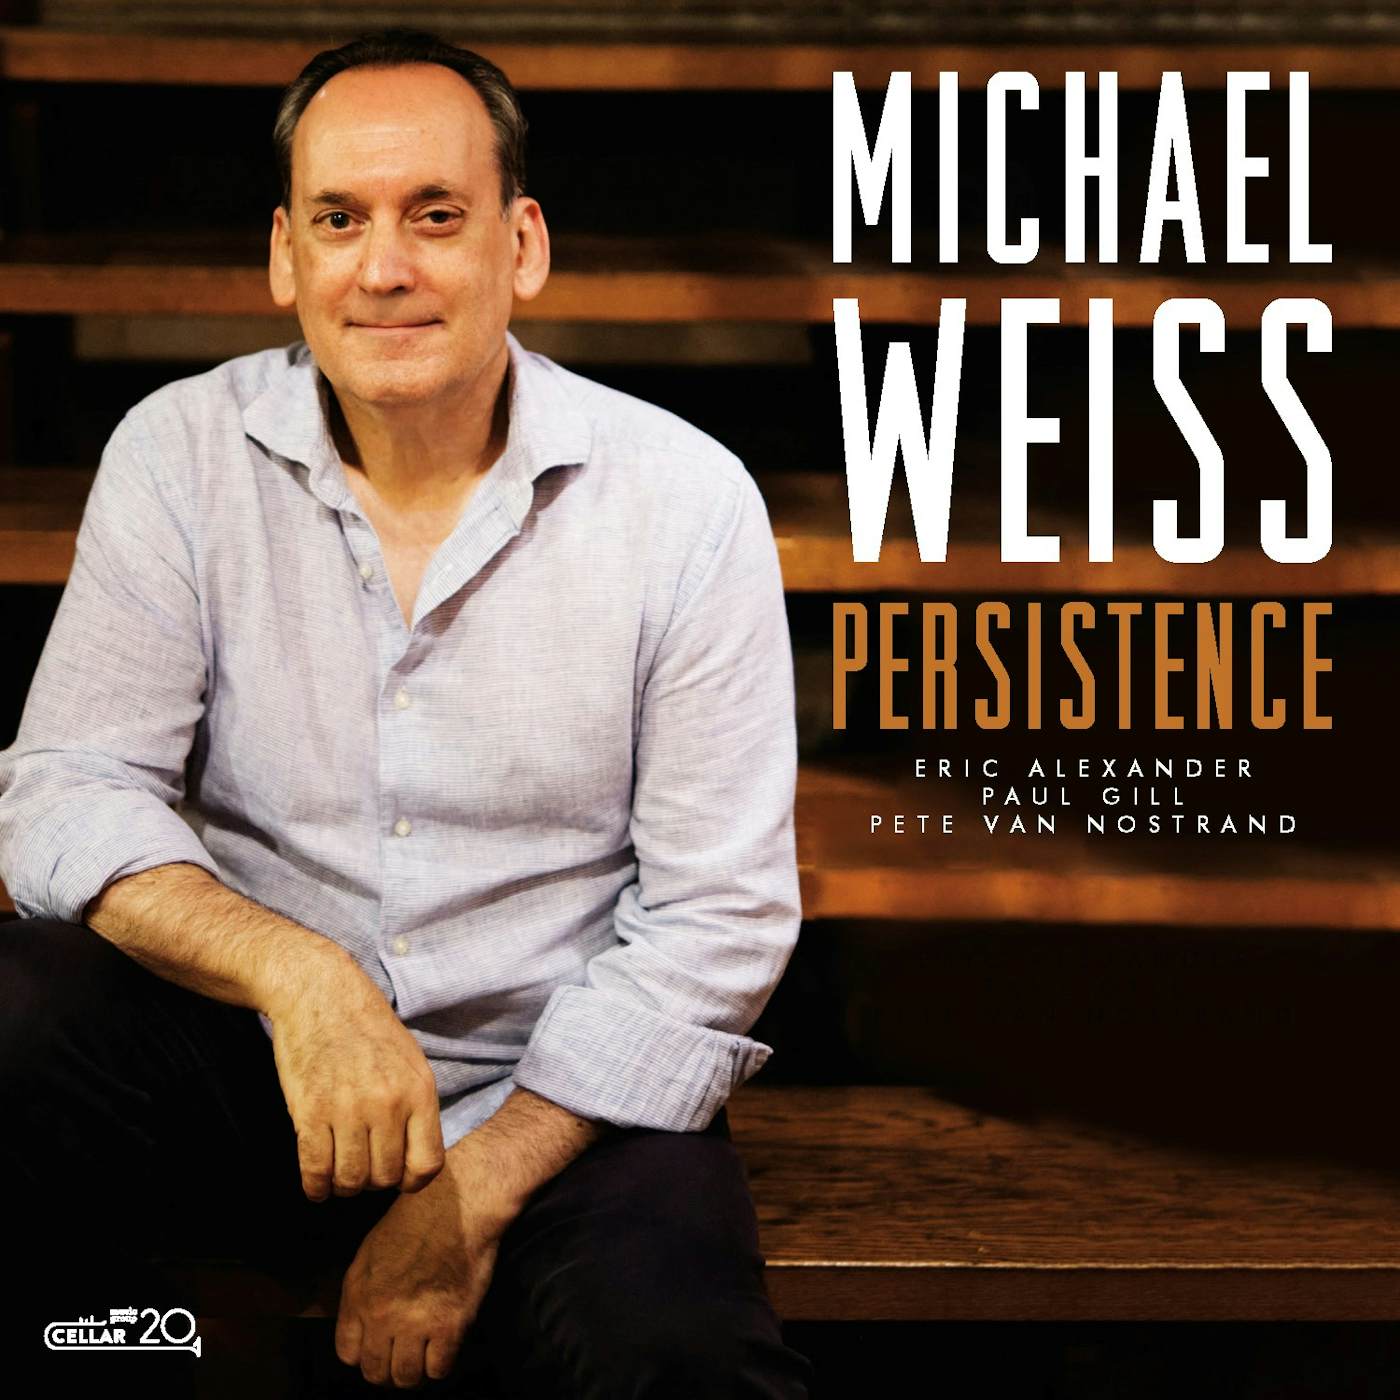 Michael Weiss PERSISTENCE CD